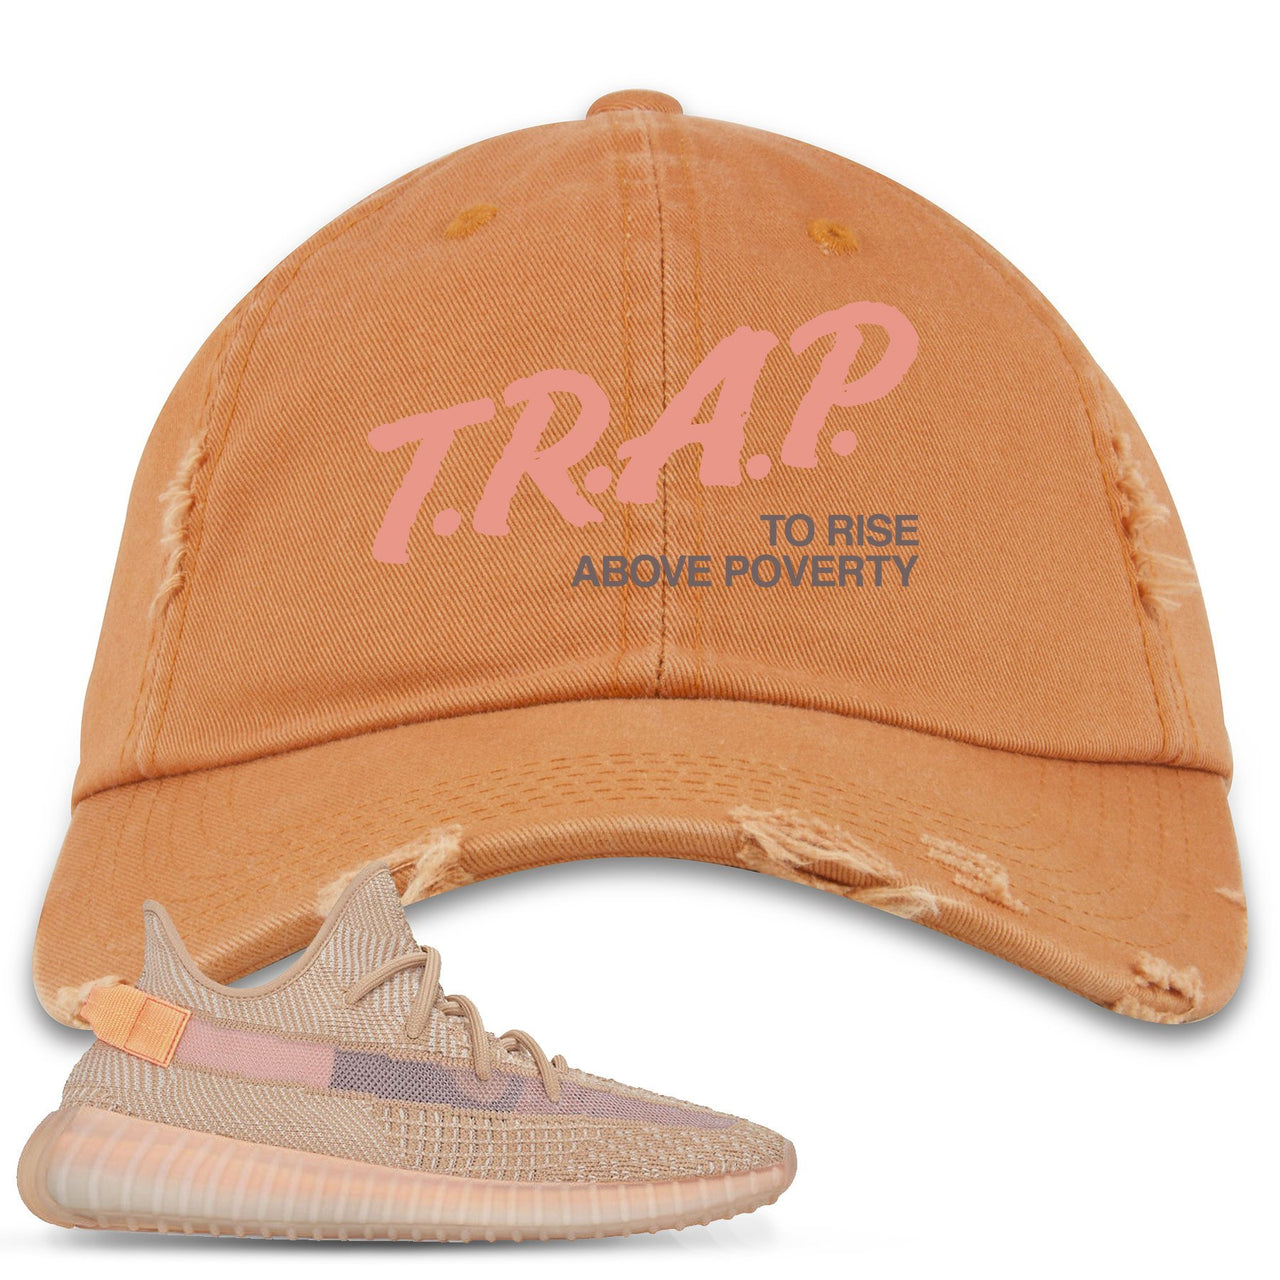 Clay v2 350s Distressed Dad Hat | Trap To Rise Above Poverty, Burnt Orange